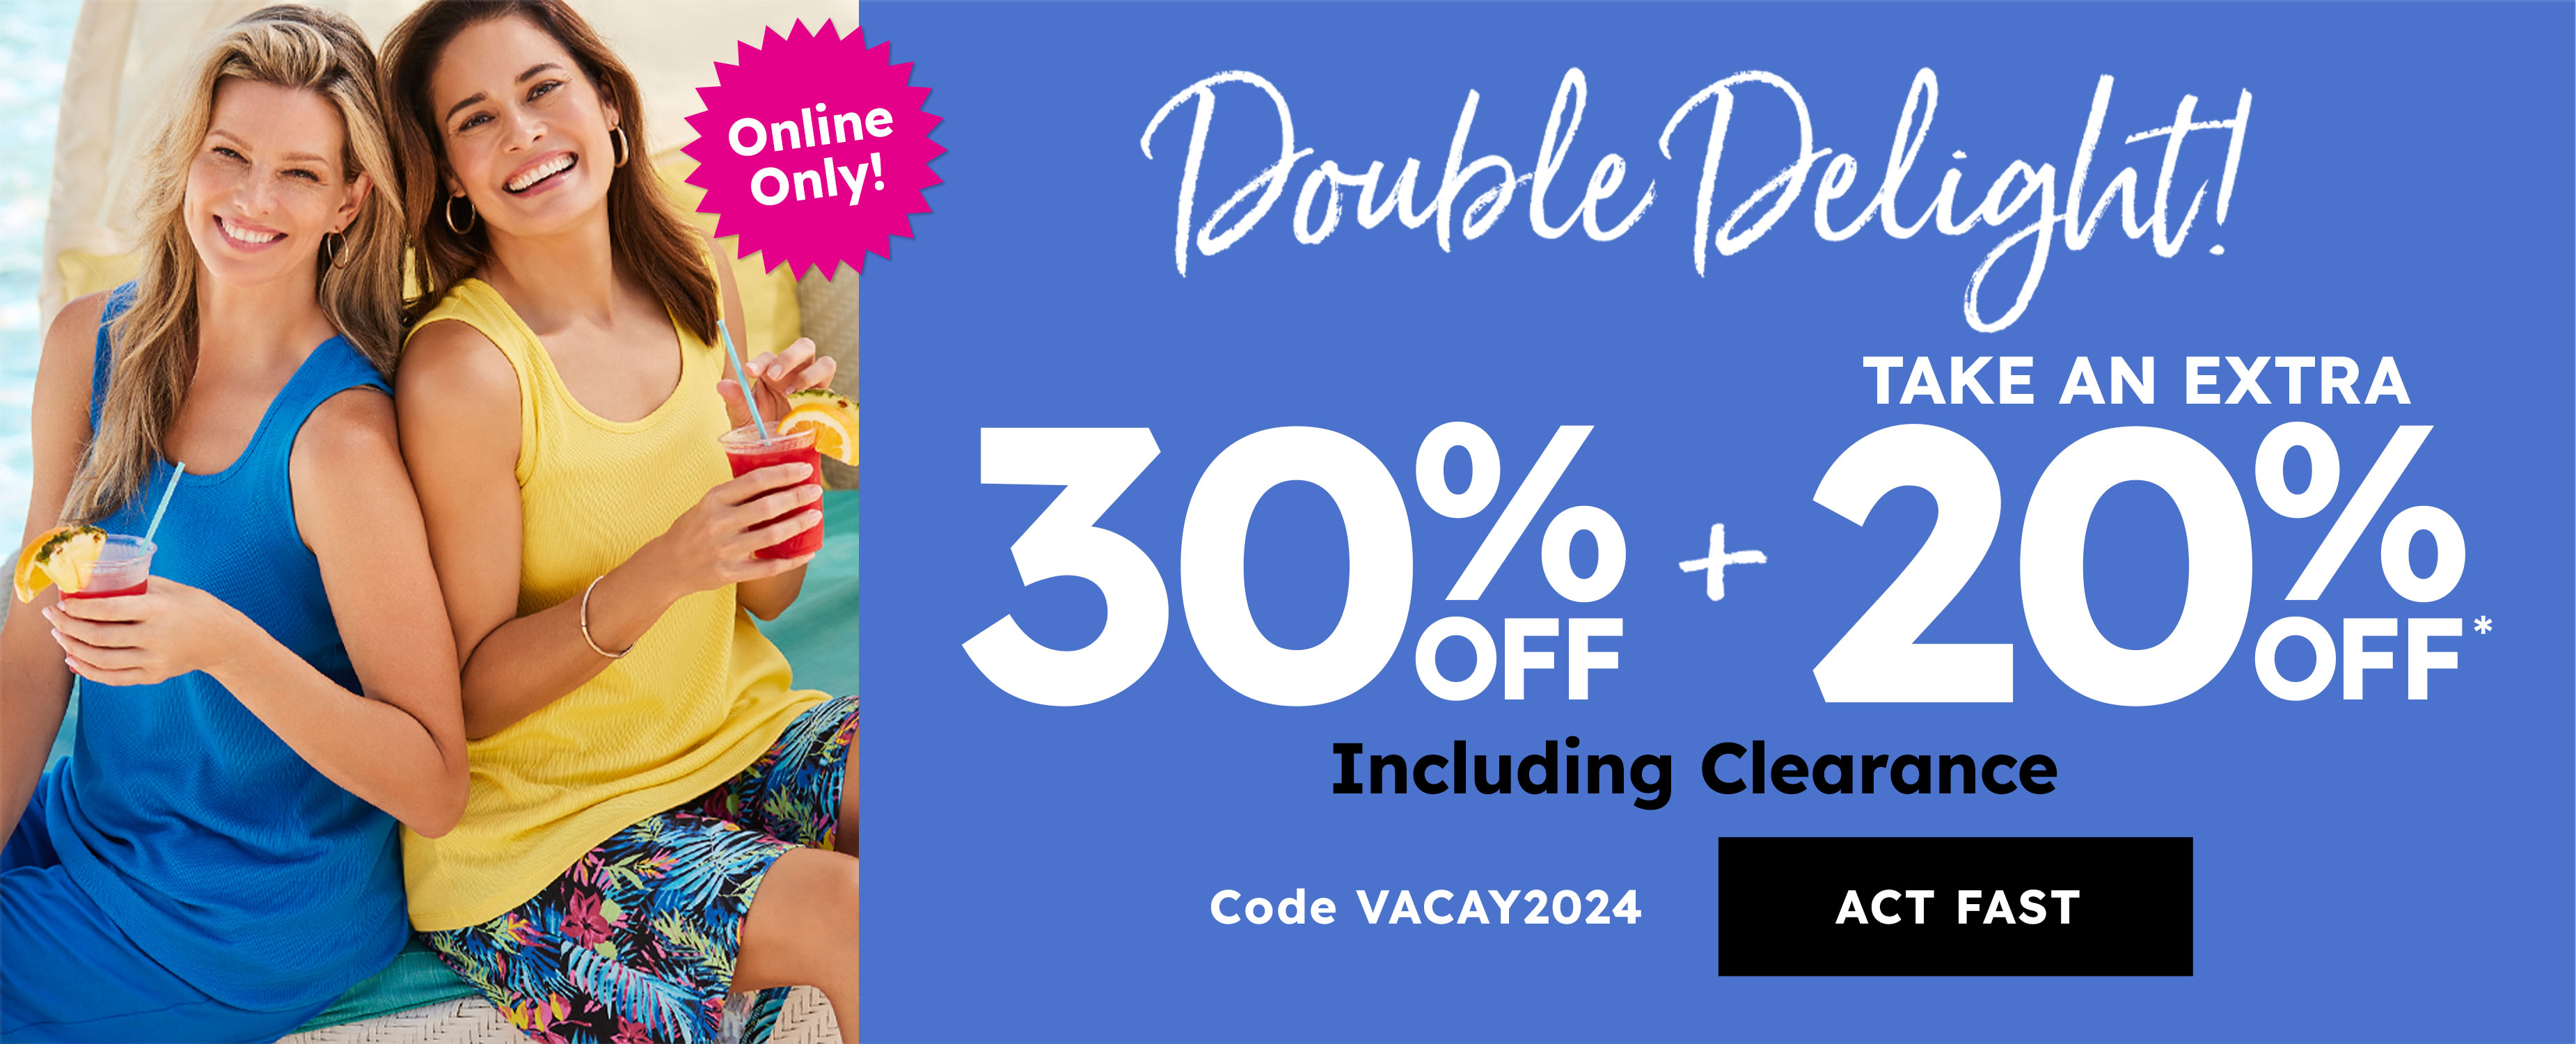 Double delight! 30% off + take an extra 20% off including clearance code VACAY2024 act fast